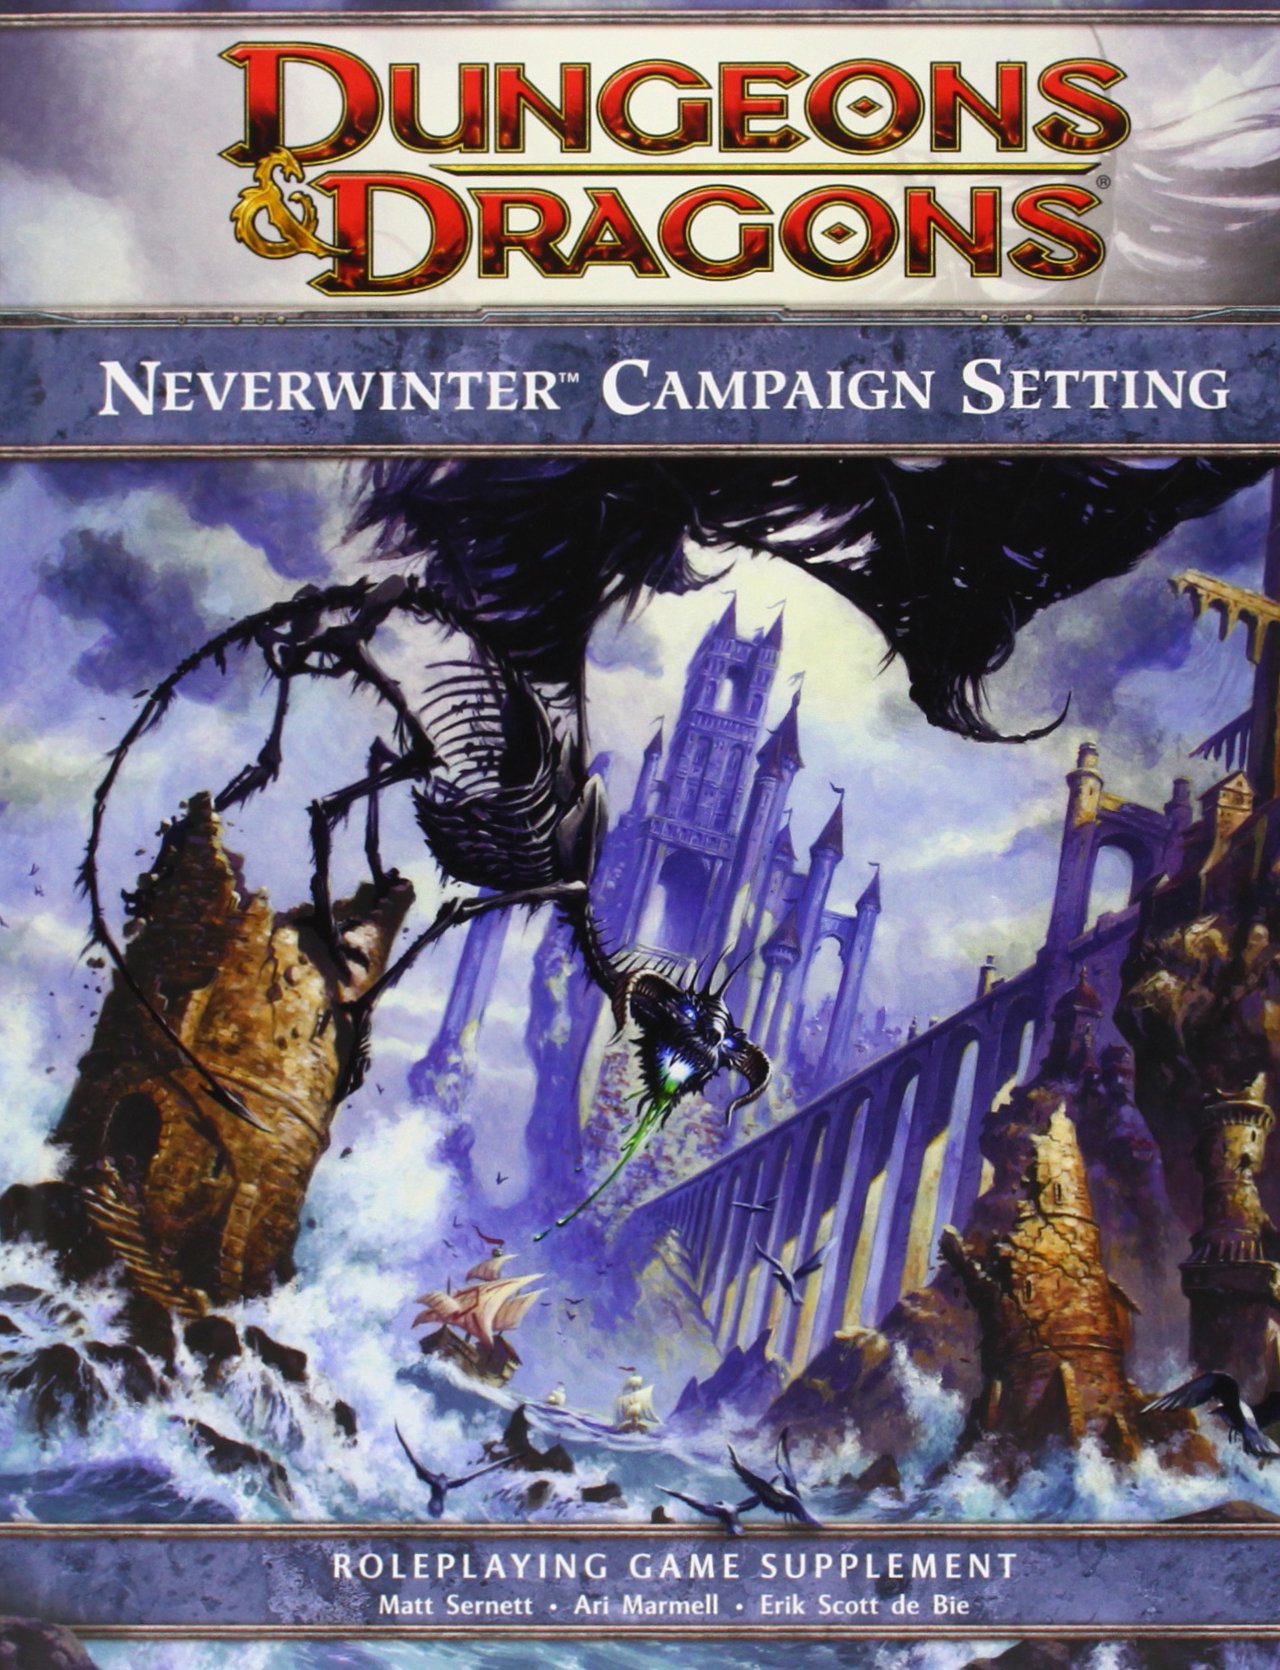 Dungeons & Dragons: Neverwinter Pics, Video Game Collection